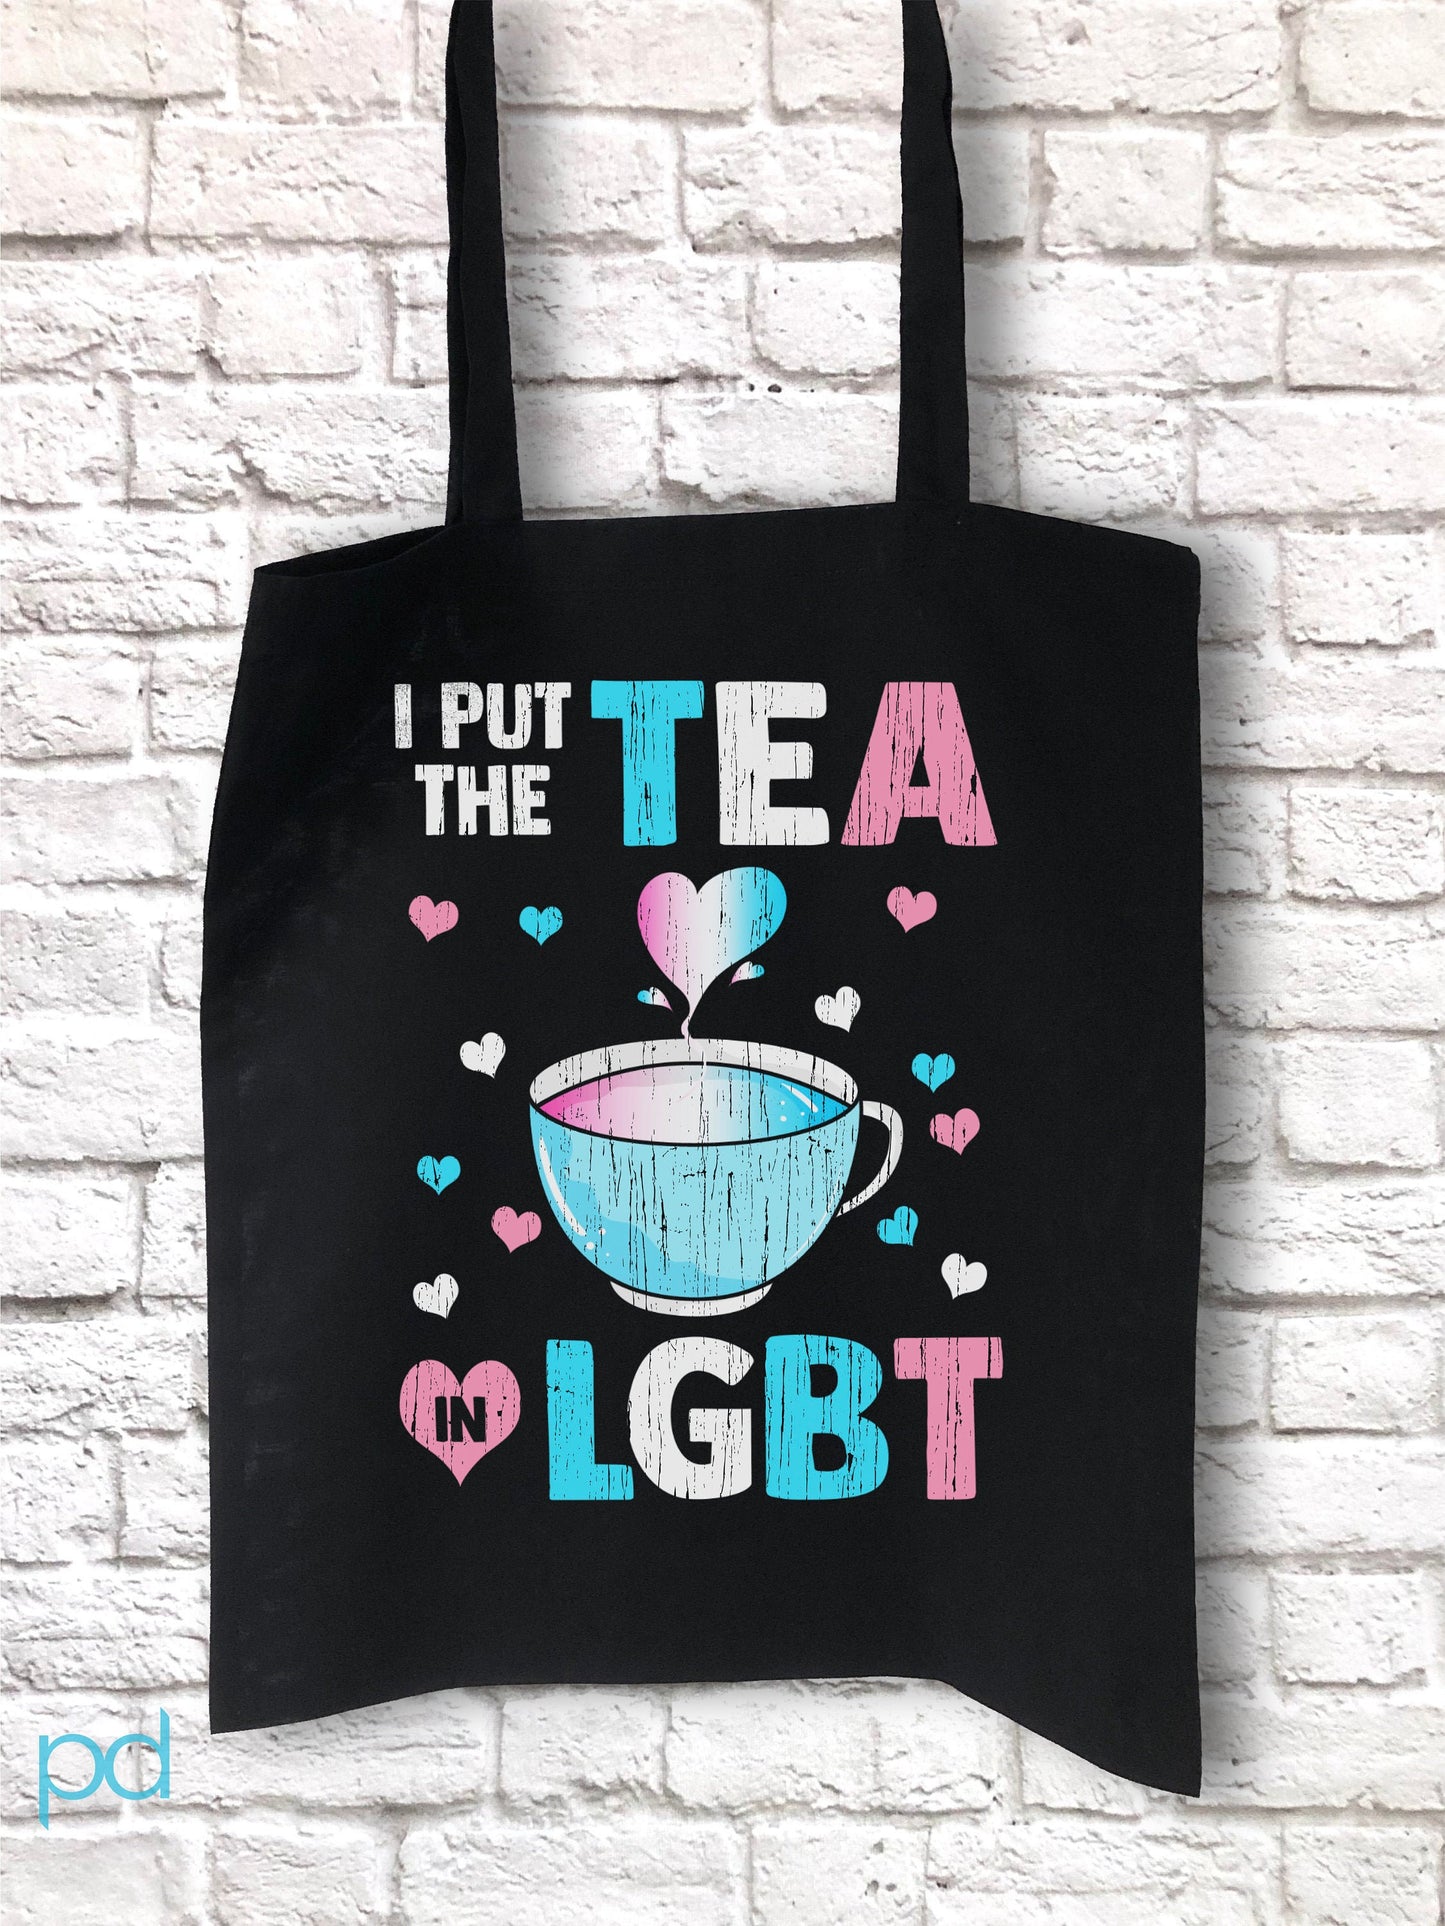 I Put The Tea In LGBT Tote Bag, Funny Trans Gift Idea, Humorous Transgender Reusable Shopping Carrier Bag